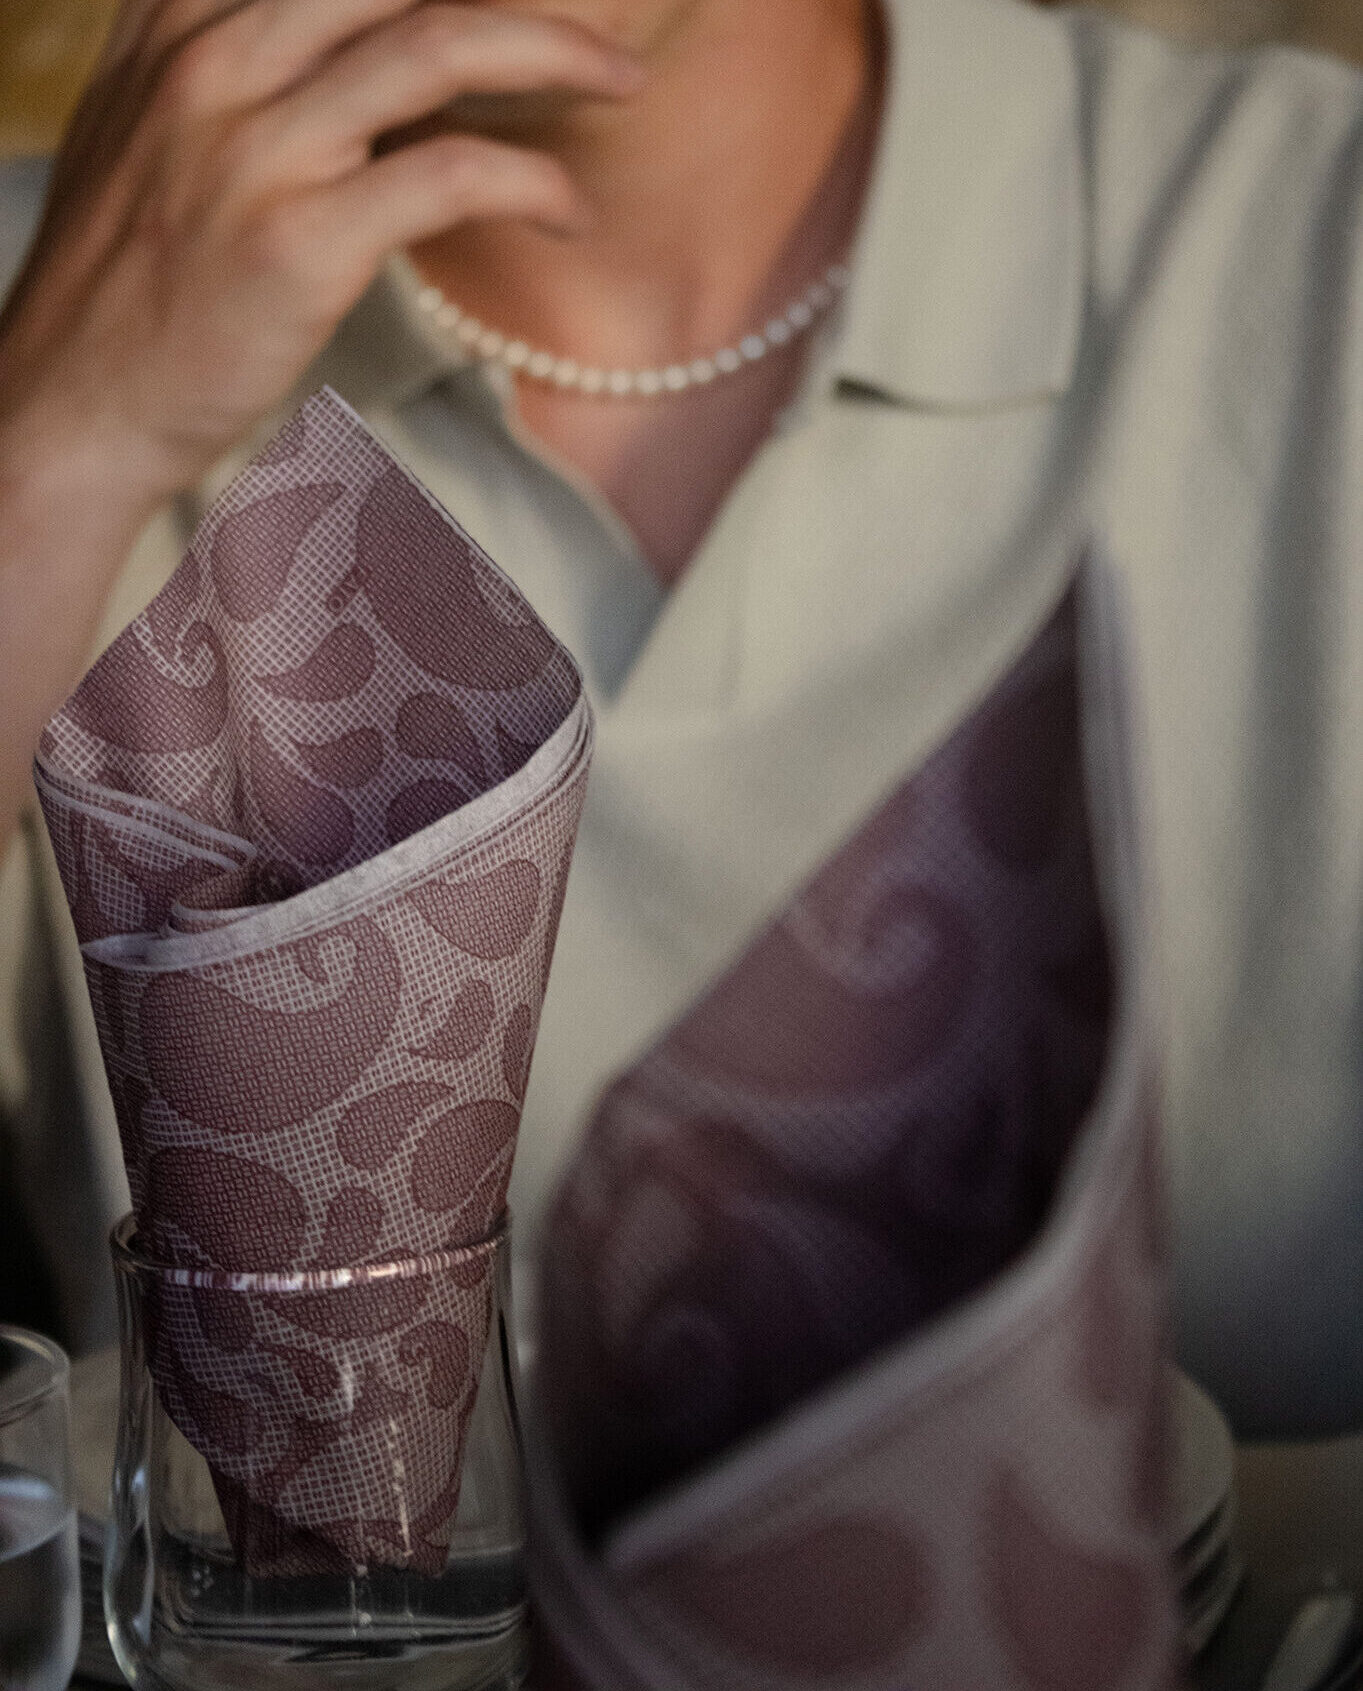 Two napkins folded in glasses stand in focus while a blurry figure sits behind them in a nice atmospheric shot.